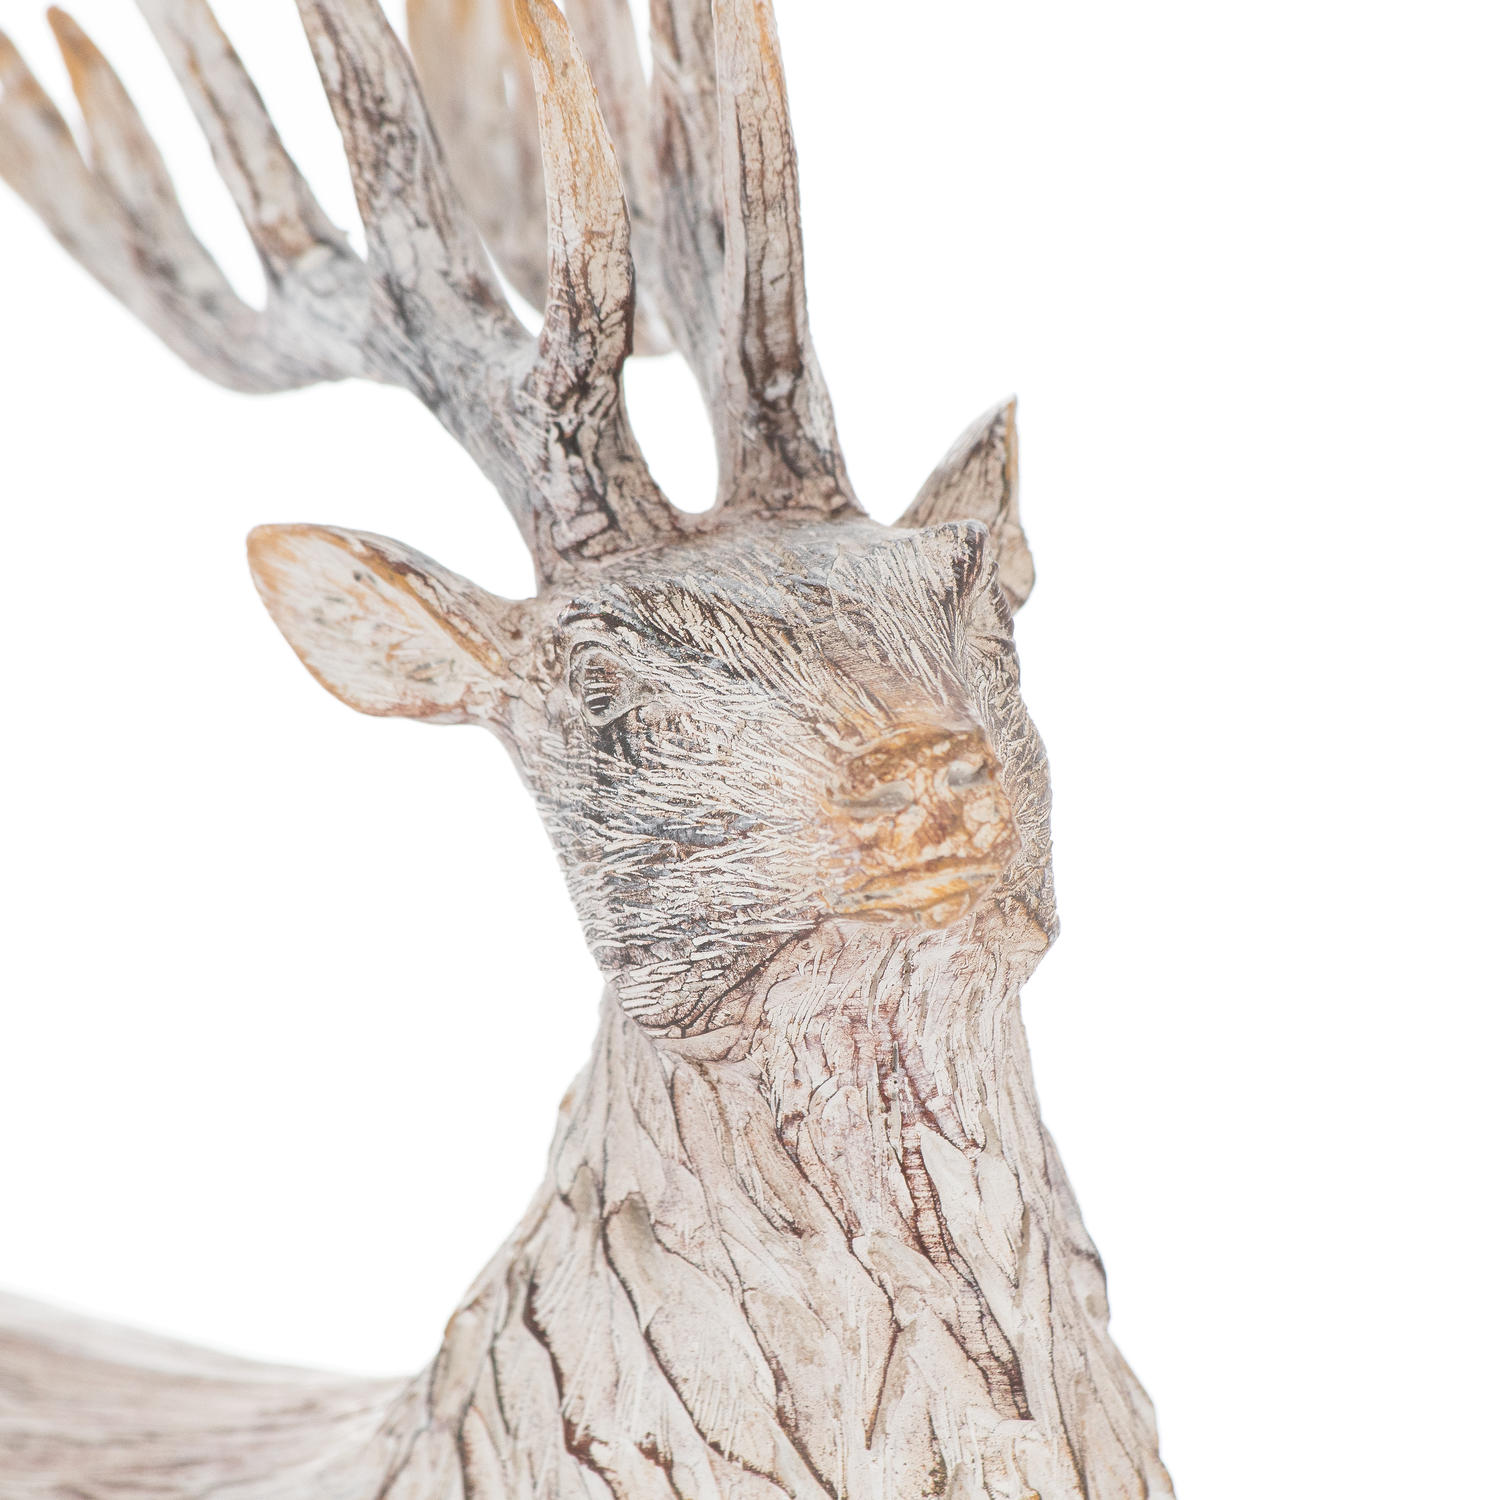 Carved Wood Effect Stag - Image 2